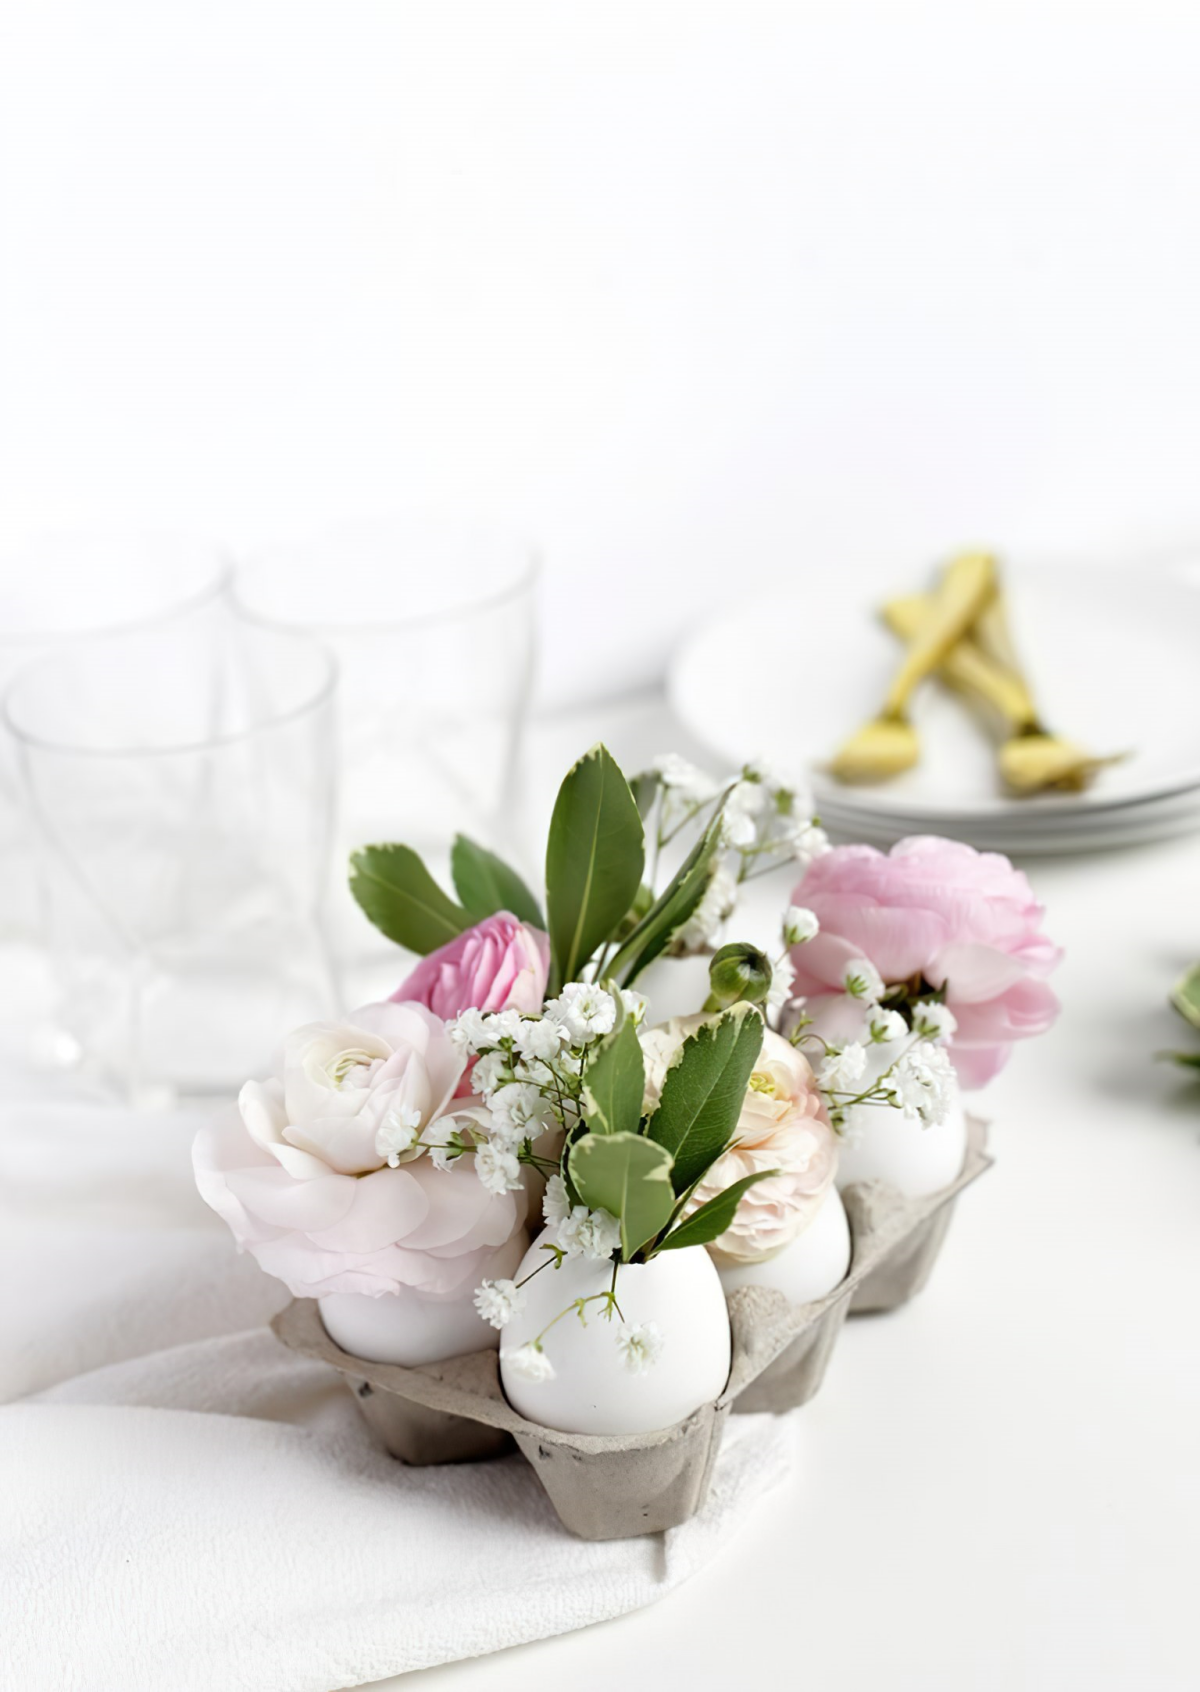 Table decorations and how to decorate a table with tulips in eggshells.